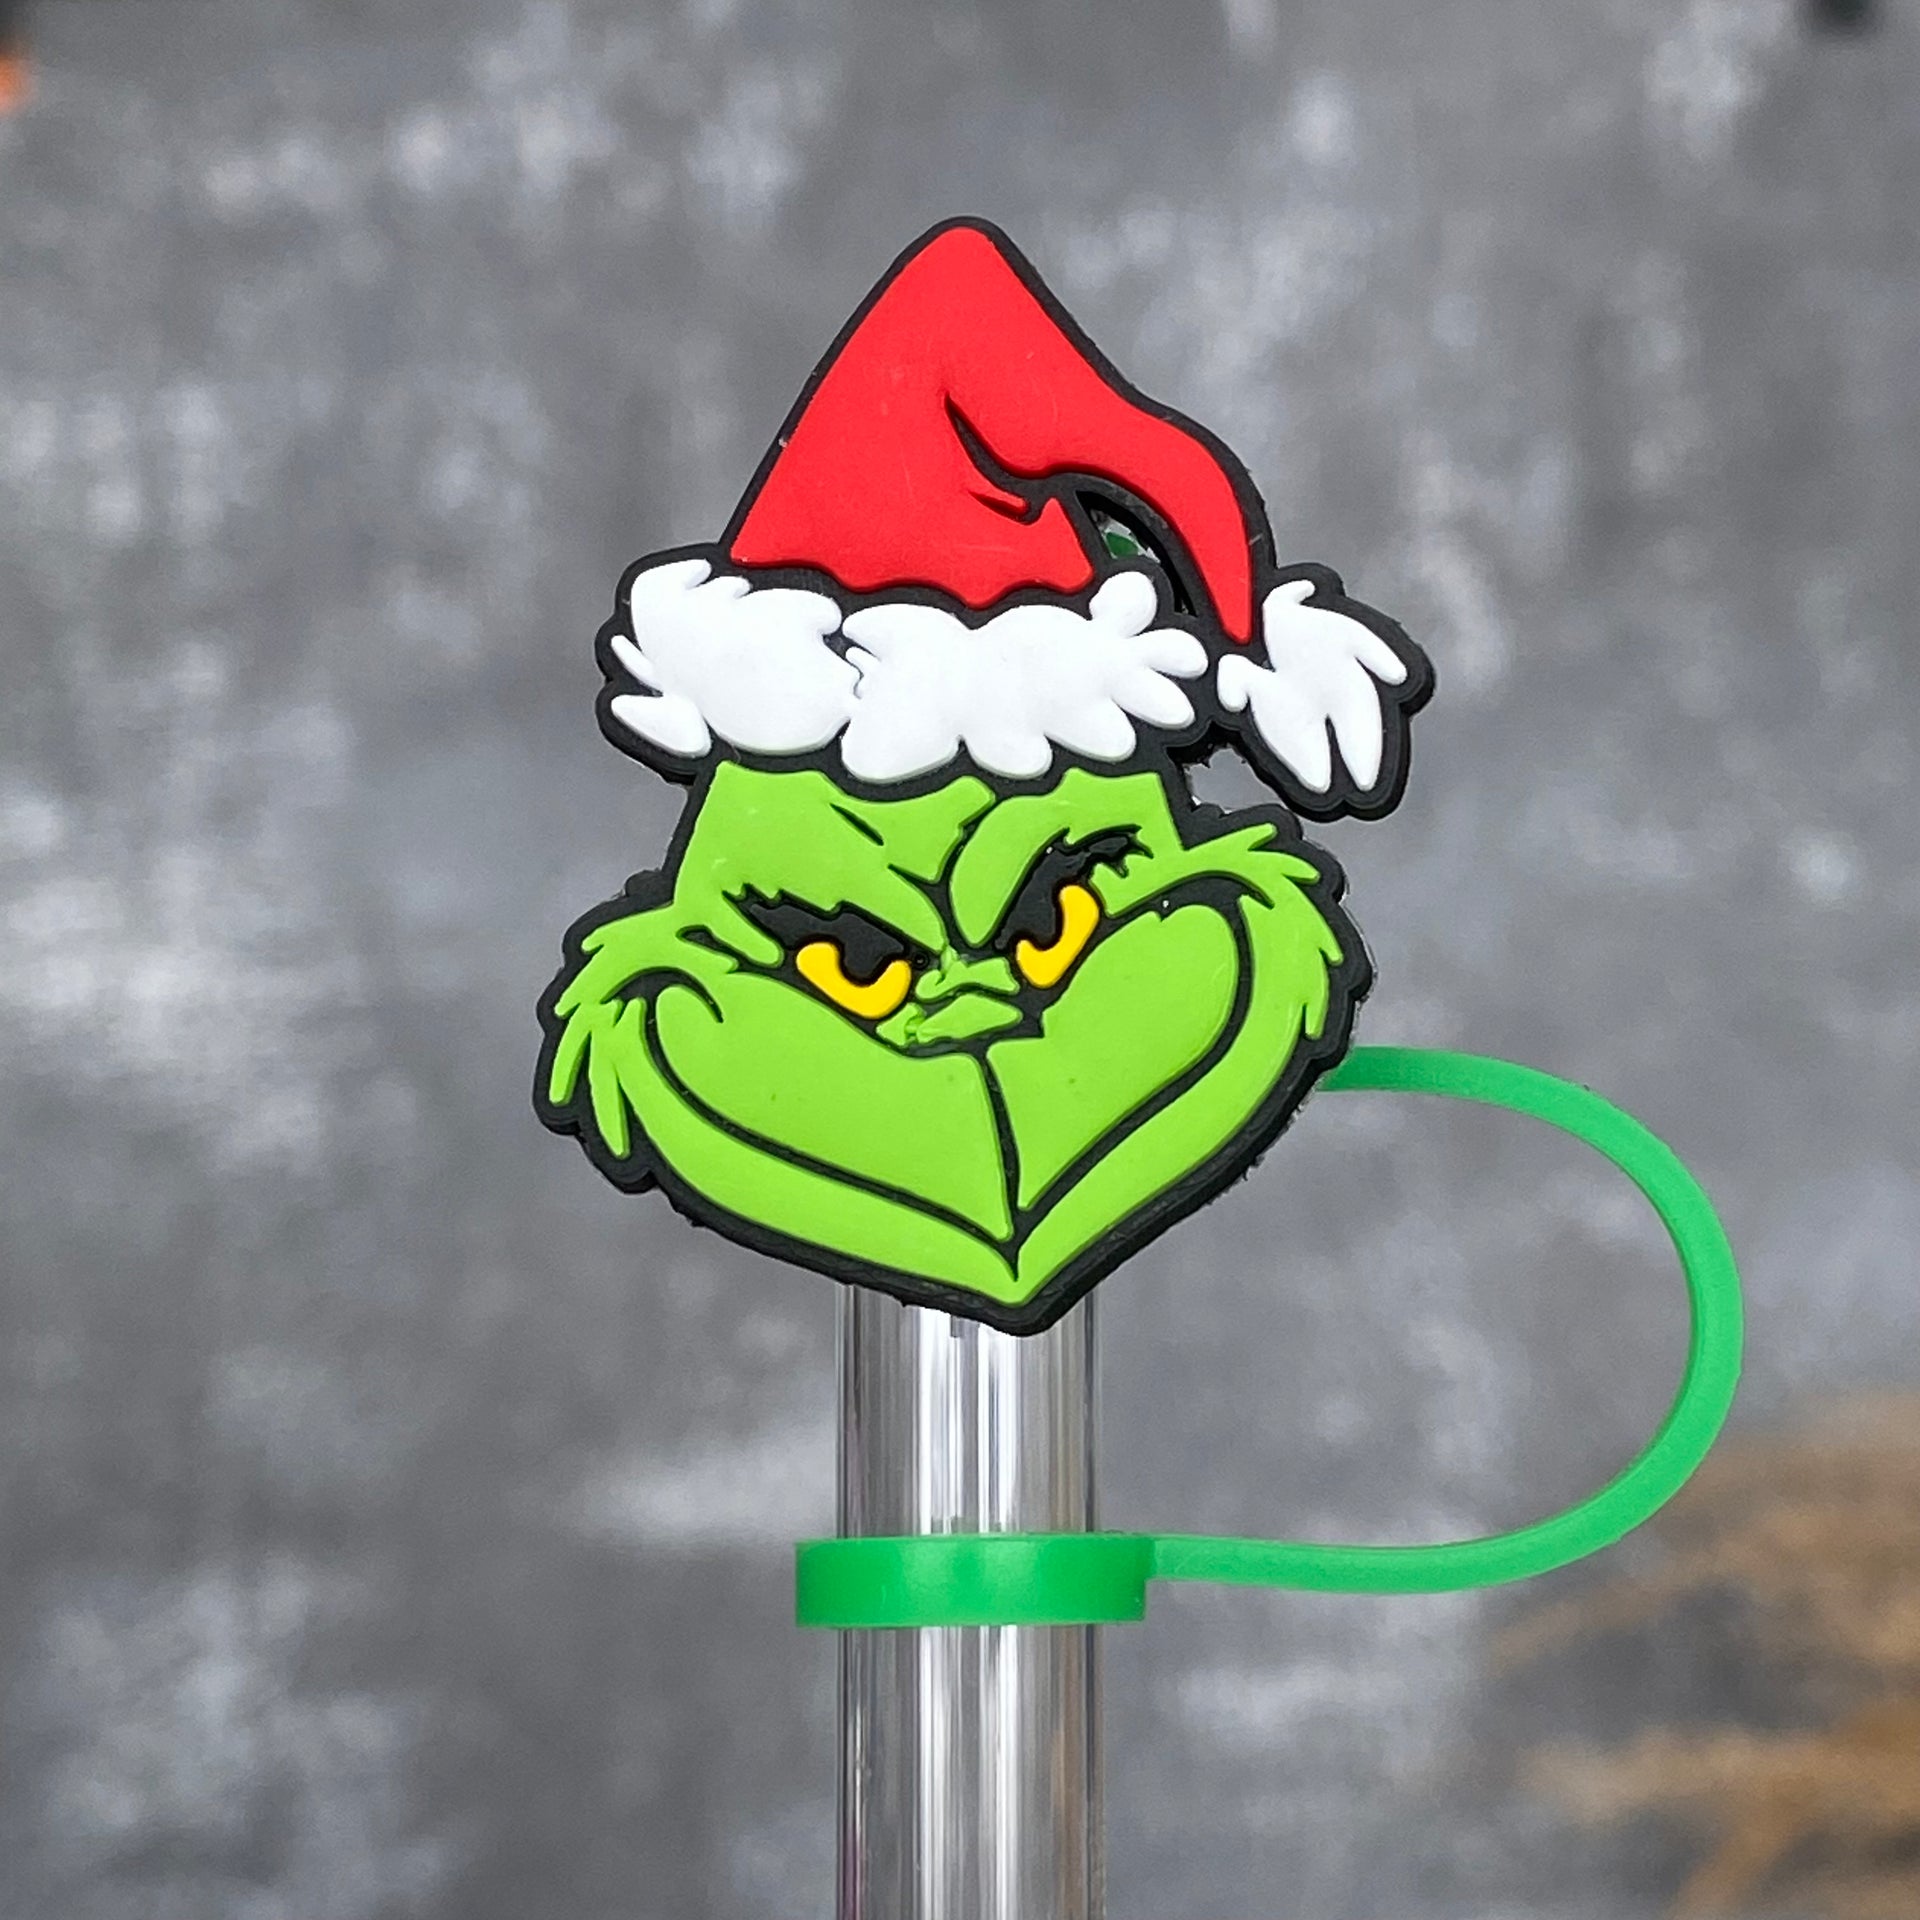 Red grinch face straw topper